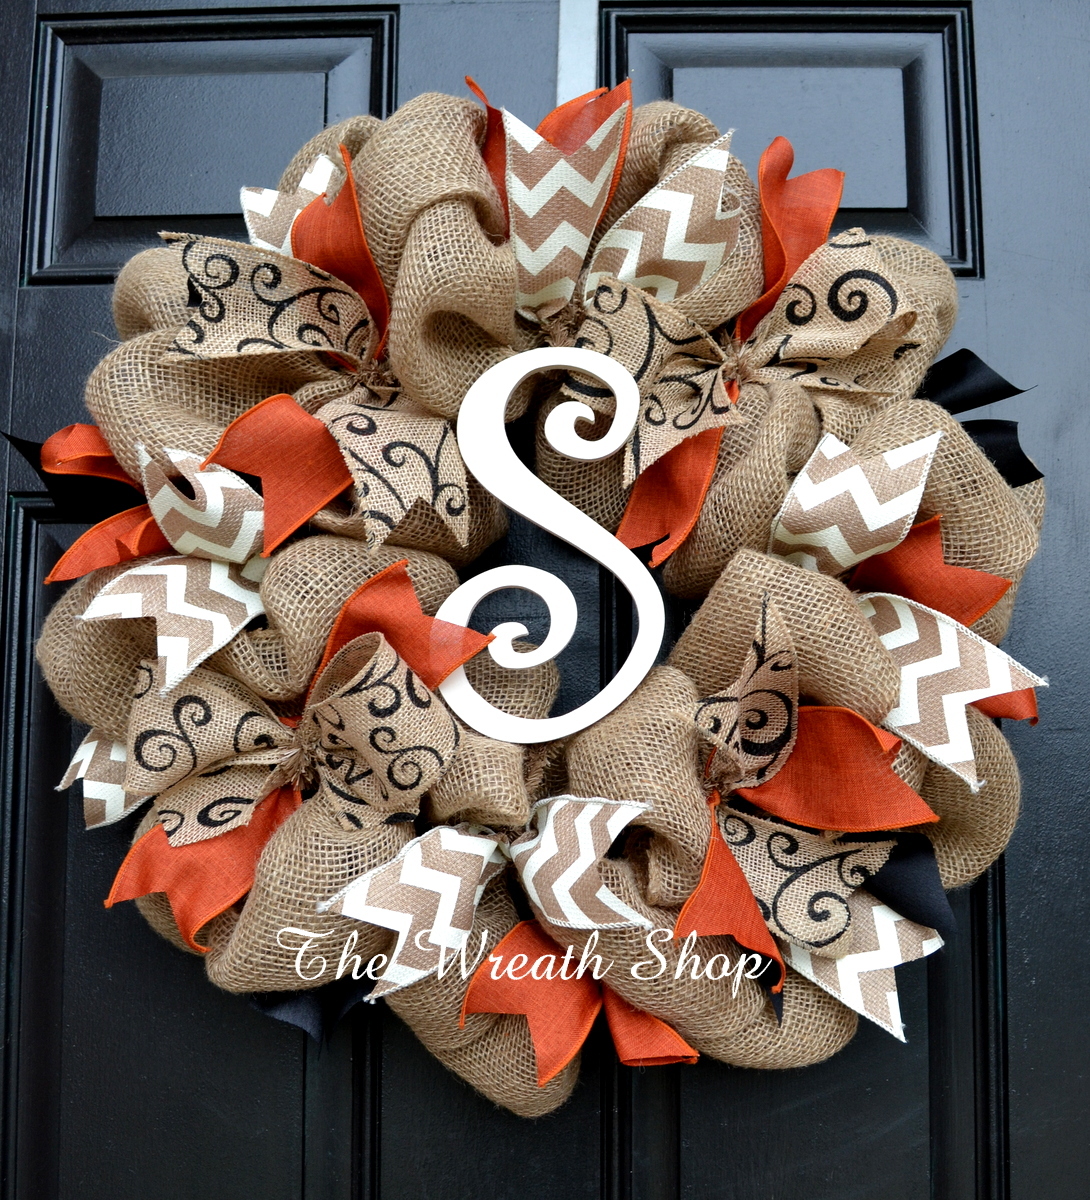 47 cute and inviting fall front door decor ideas